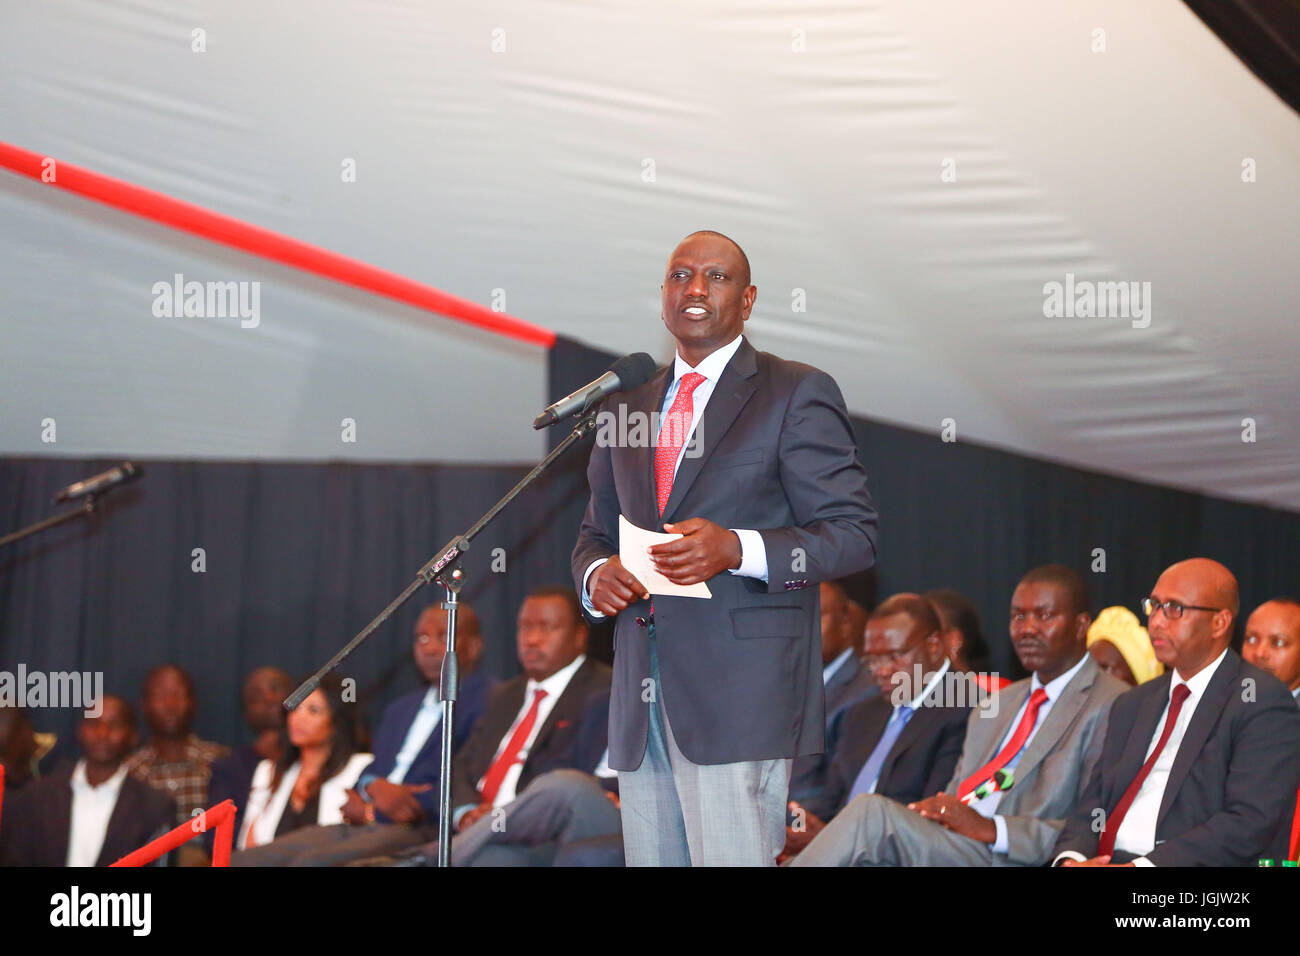 (170707) -- ELDORET(KENYA), July 7, 2017 (Xinhua) -- Kenyan Deputy President William Ruto delivers a speech on the launching ceremony of the Special Economic Zone project in Eldoret, Kenya, on July 7, 2017. Kenya on Friday launched a Special Economic Zone (SEZ) project that is expected to attract about 2 billion U.S. dollars of foreign investments. The project is a joint venture between Kenyan-based company Africa Economic Zone and China's Guangdong New South Group. (Xinhua/Pan Siwei) Stock Photo